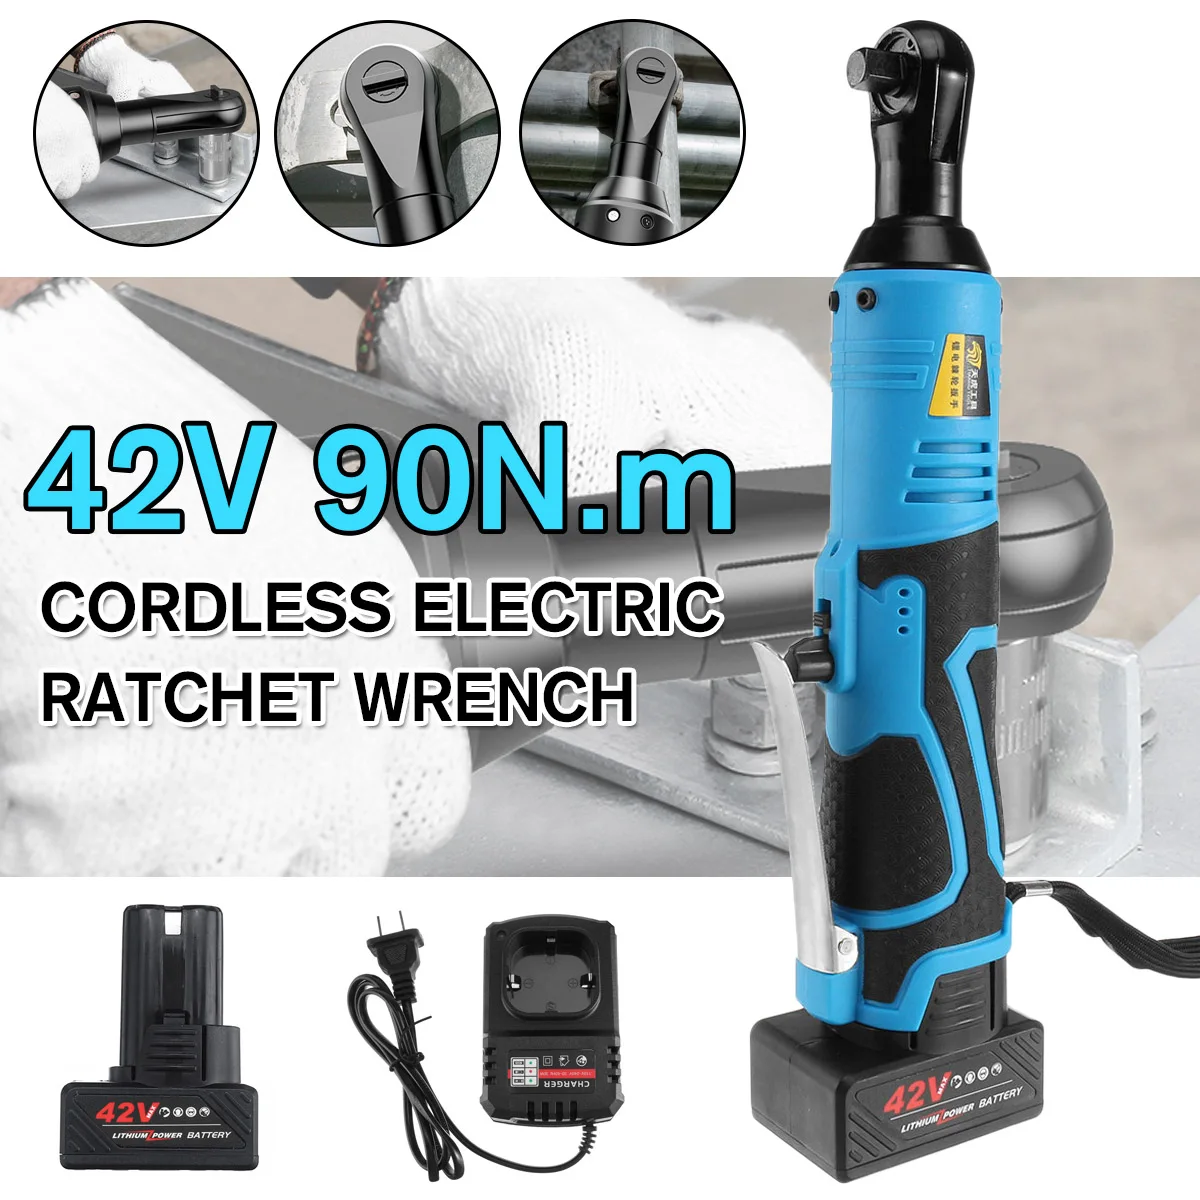 

Electric Wrench 3/8" Cordless Ratchet 42V Rechargeable Scaffolding 90N.m Right Angle Wrench Tool with 1/2 Battery Charger Kit